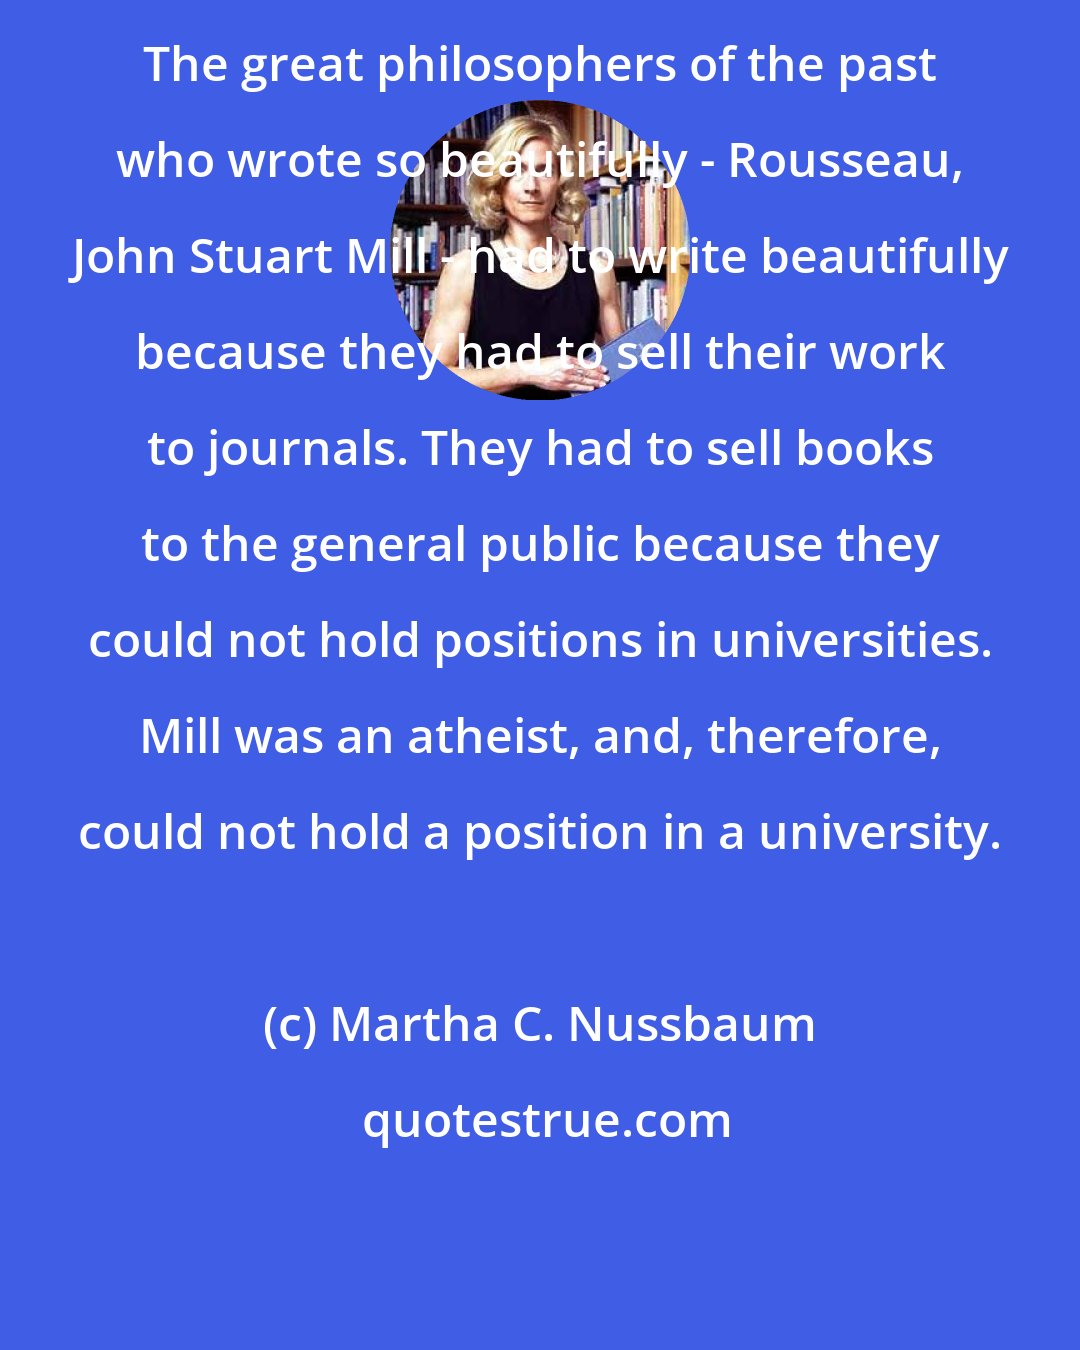 Martha C. Nussbaum: The great philosophers of the past who wrote so beautifully - Rousseau, John Stuart Mill - had to write beautifully because they had to sell their work to journals. They had to sell books to the general public because they could not hold positions in universities. Mill was an atheist, and, therefore, could not hold a position in a university.